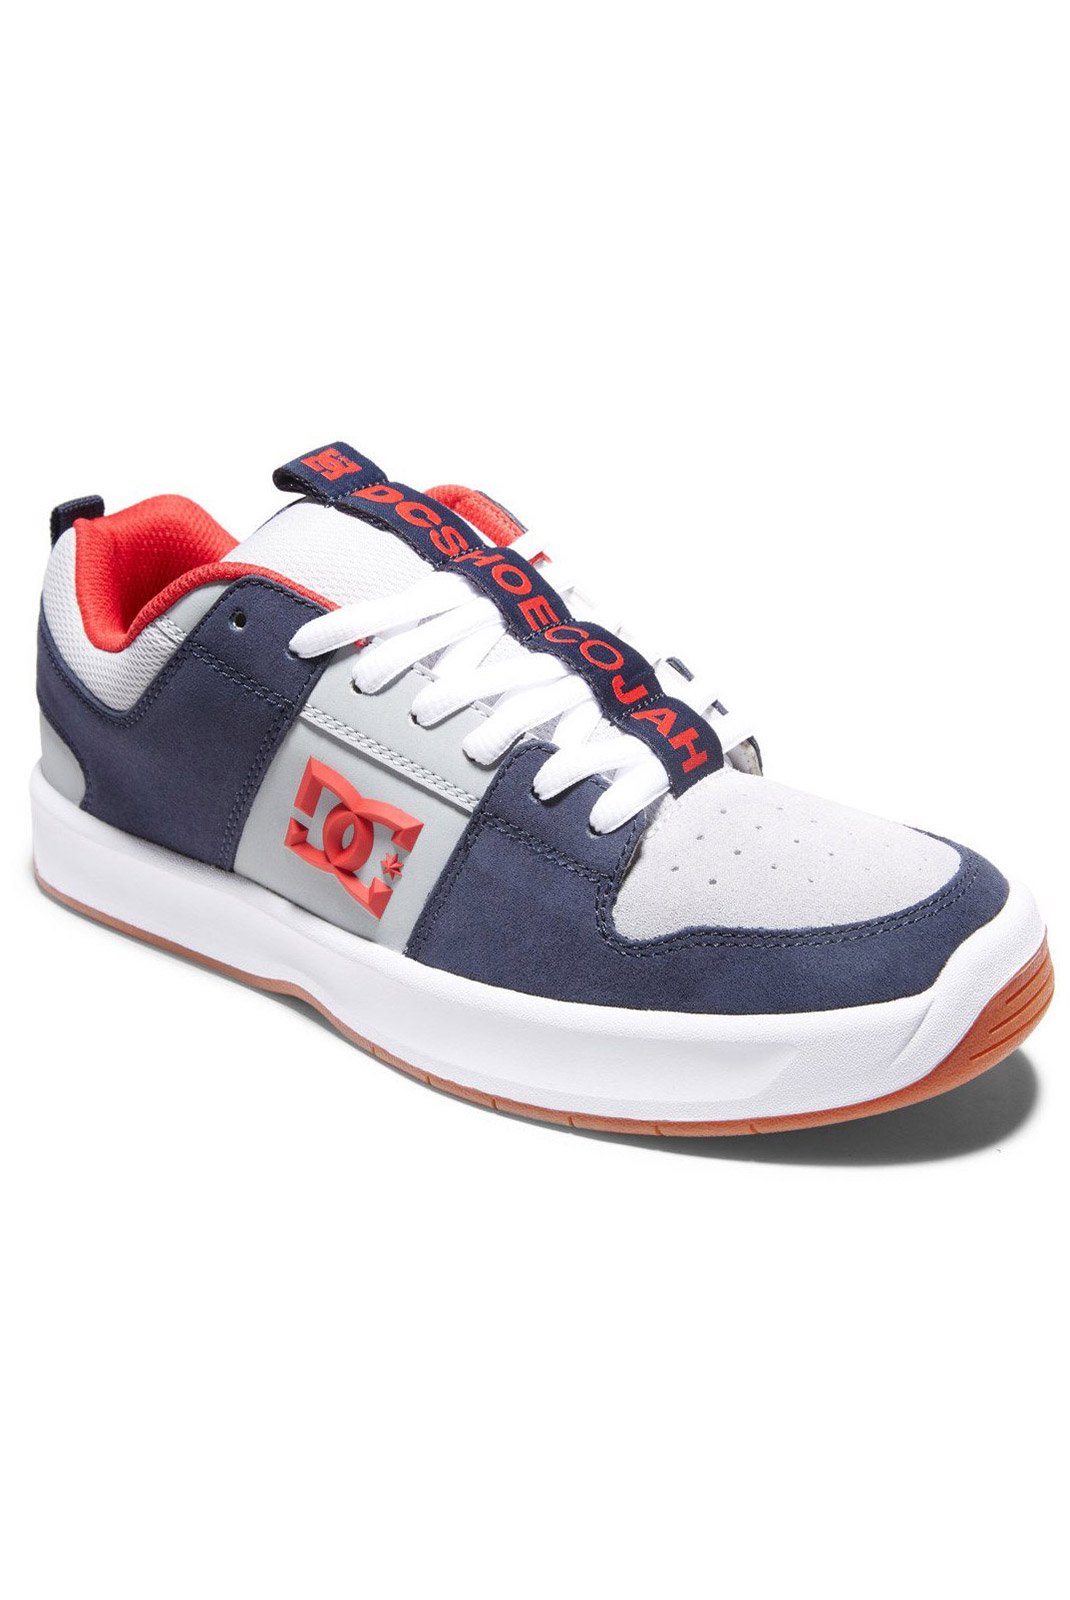 Sneakers / Sport  Dc shoes ADYS100679 NGY